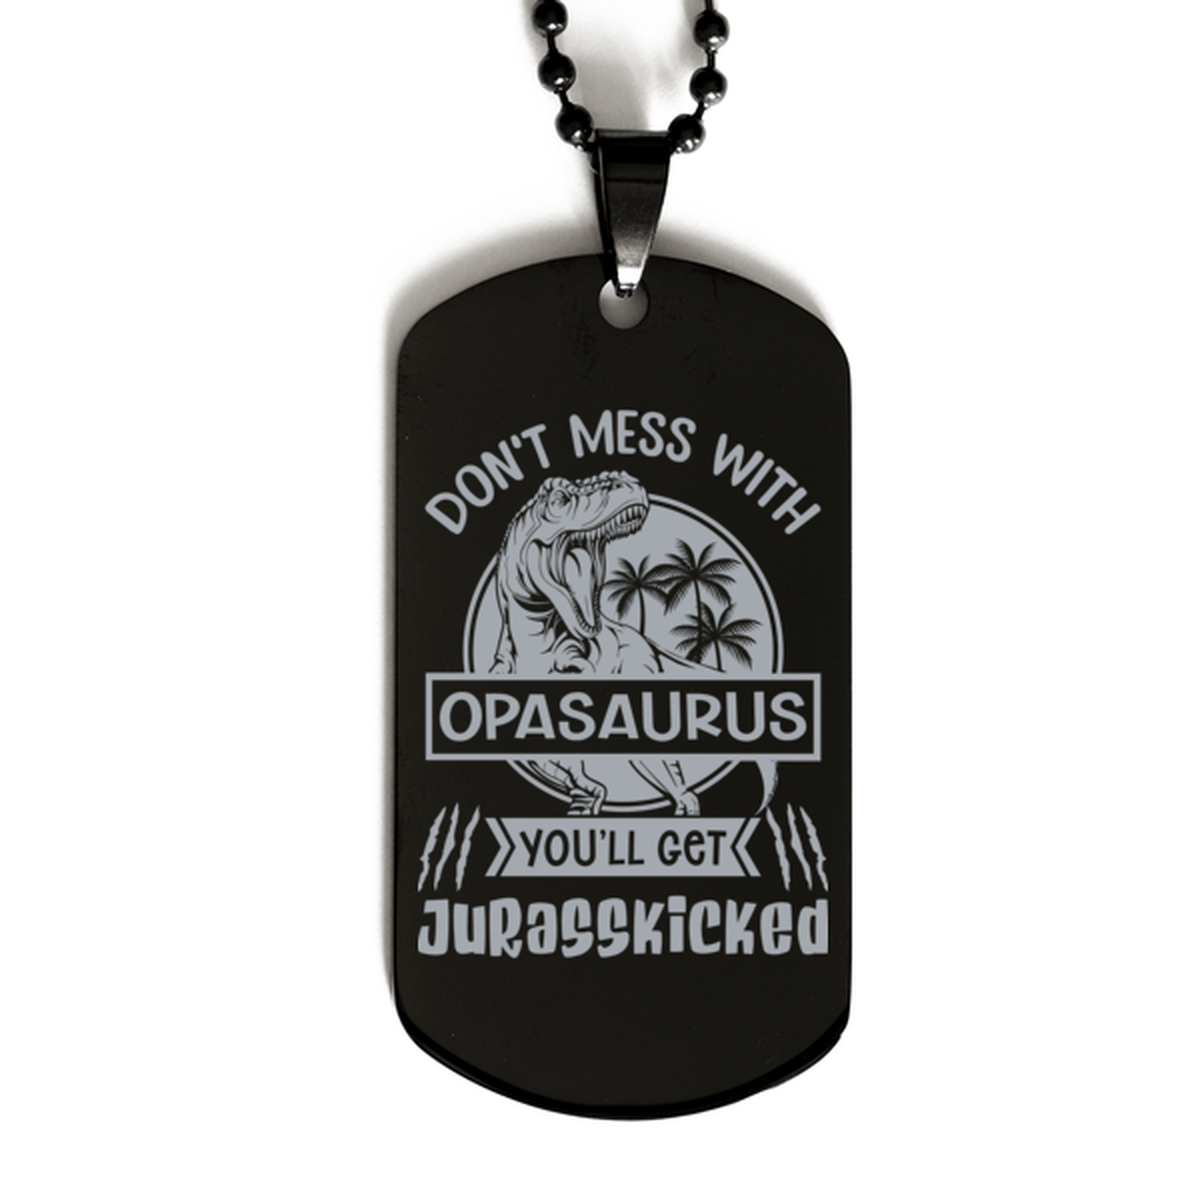 Don't Mess with Opasaurus You'll Get Jurasskicked Black Dog Tag Necklace - Funny Dinosaur Gift for Opa - Fathers Day Gift